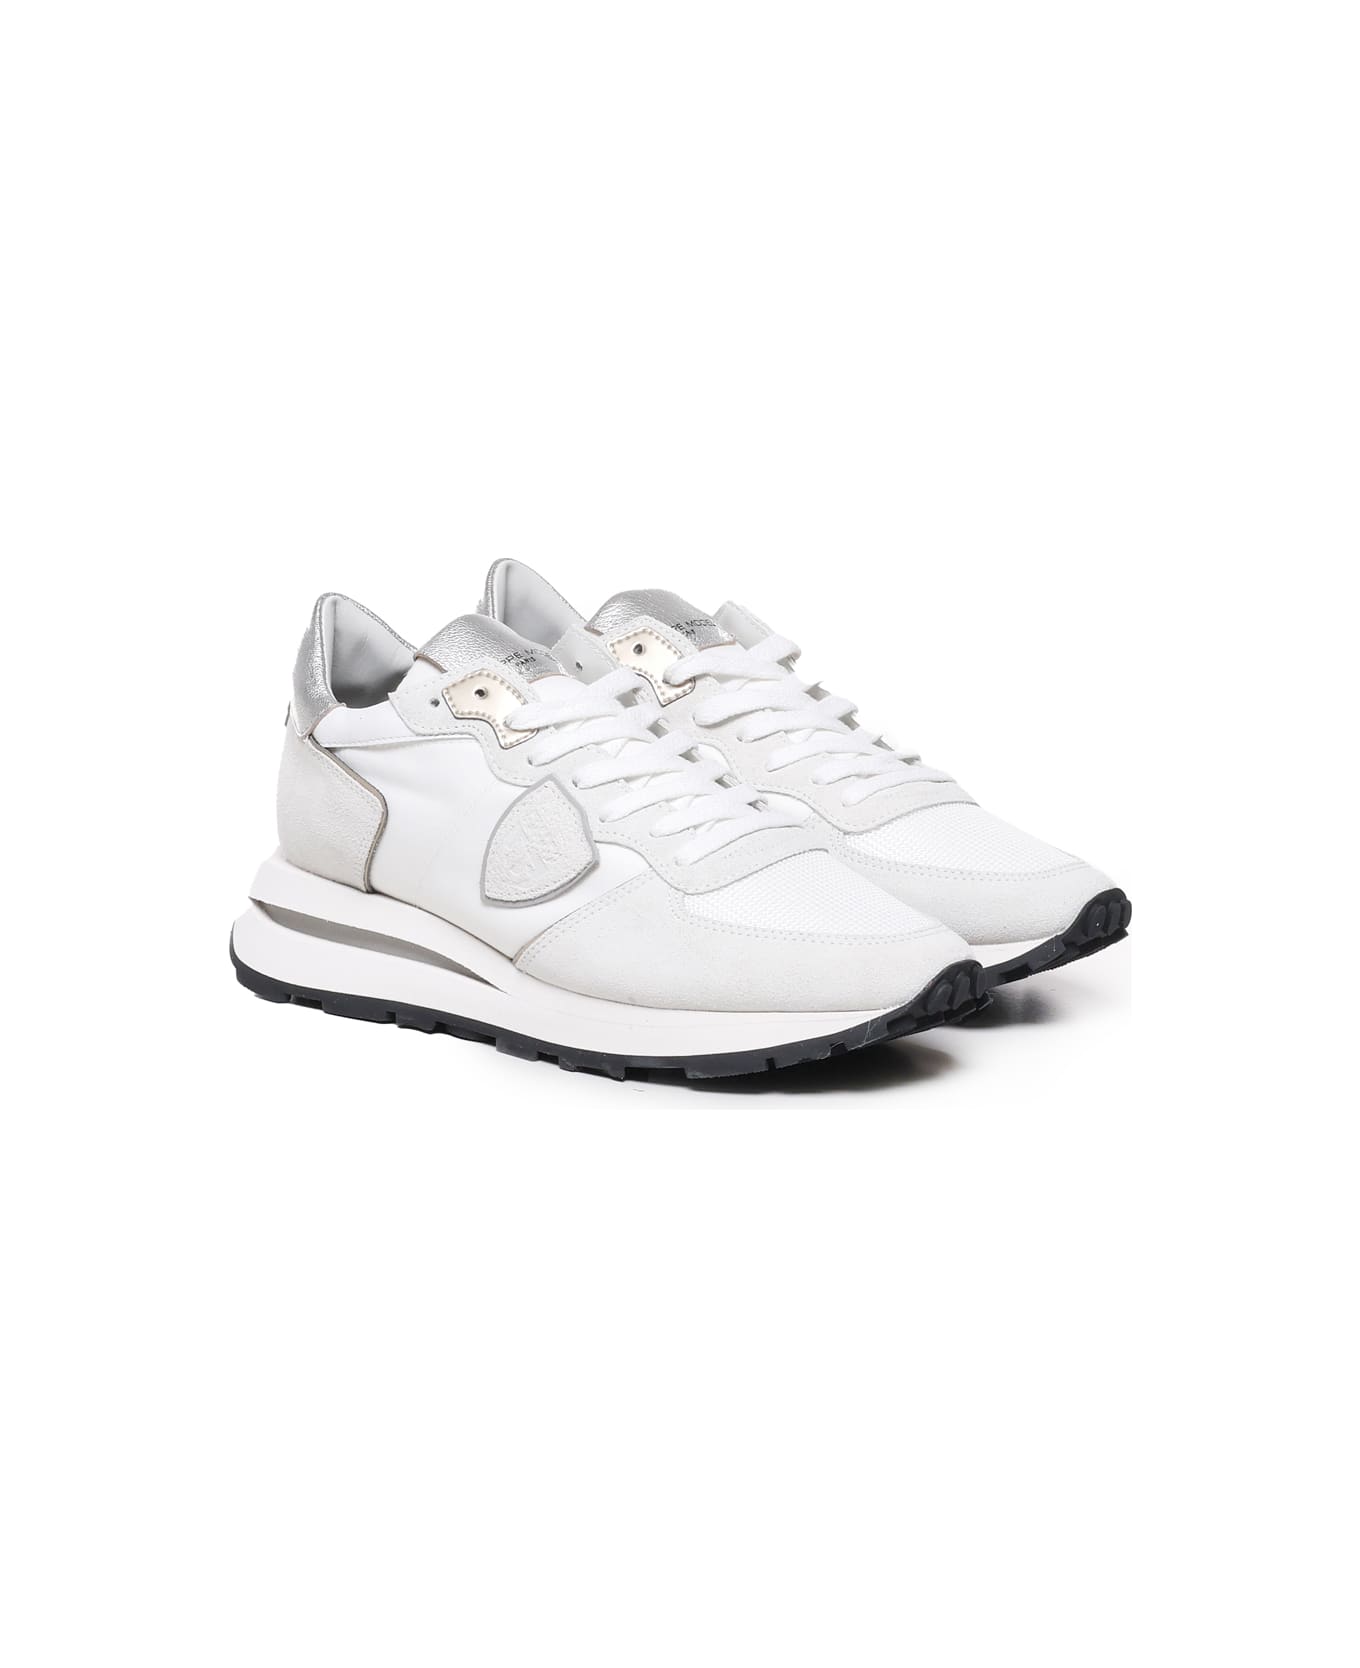 Philippe Model Trpx Sneakers With Insert Design - White